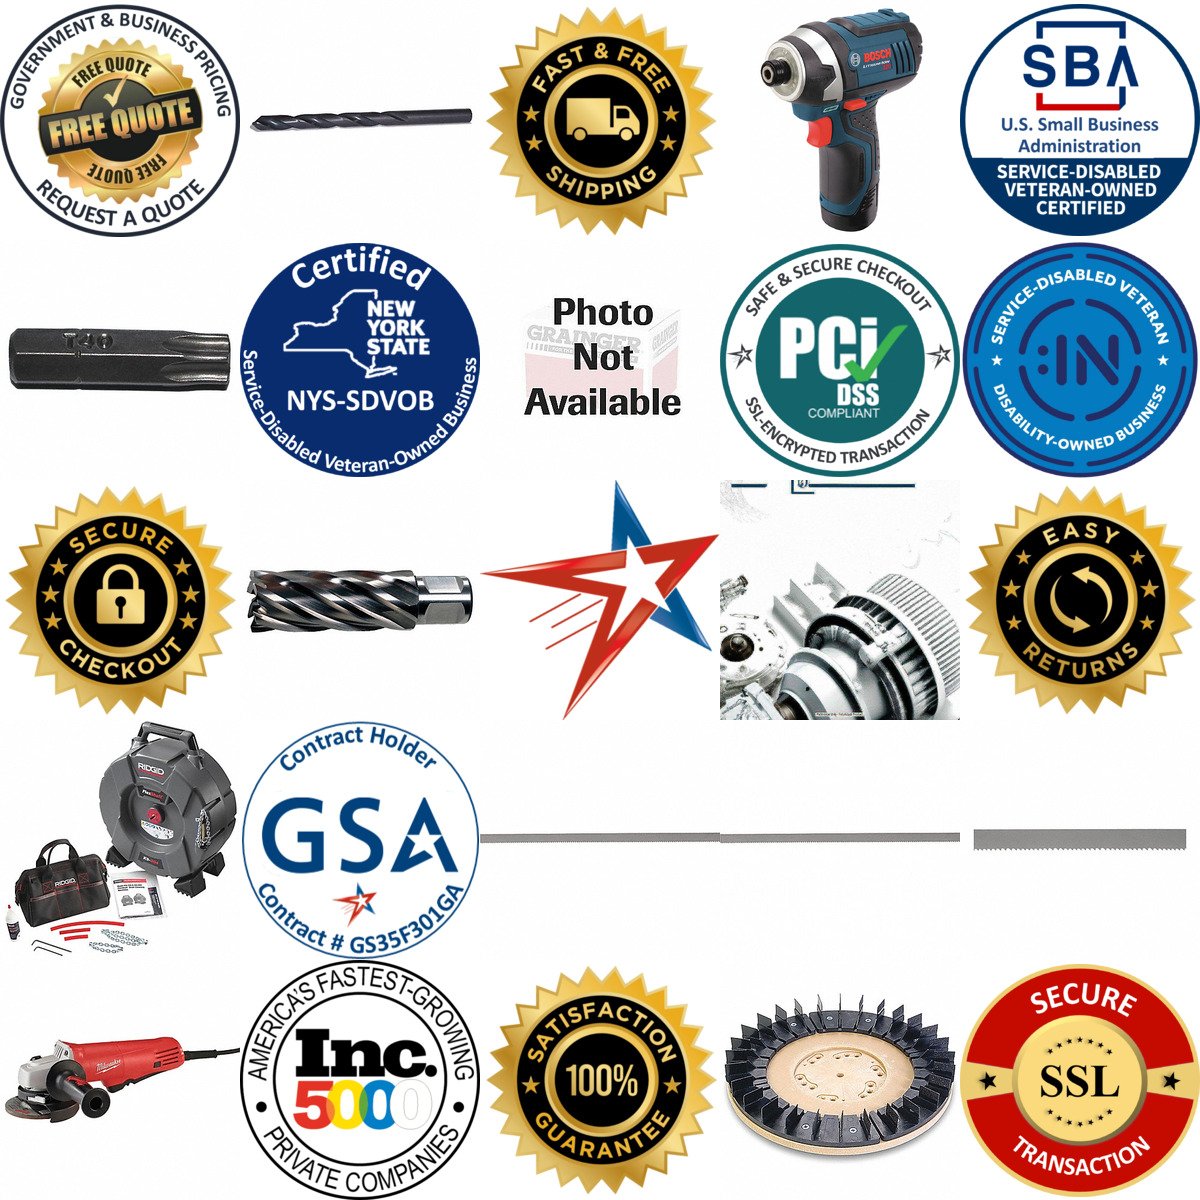 A selection of Power Tools products on GoVets